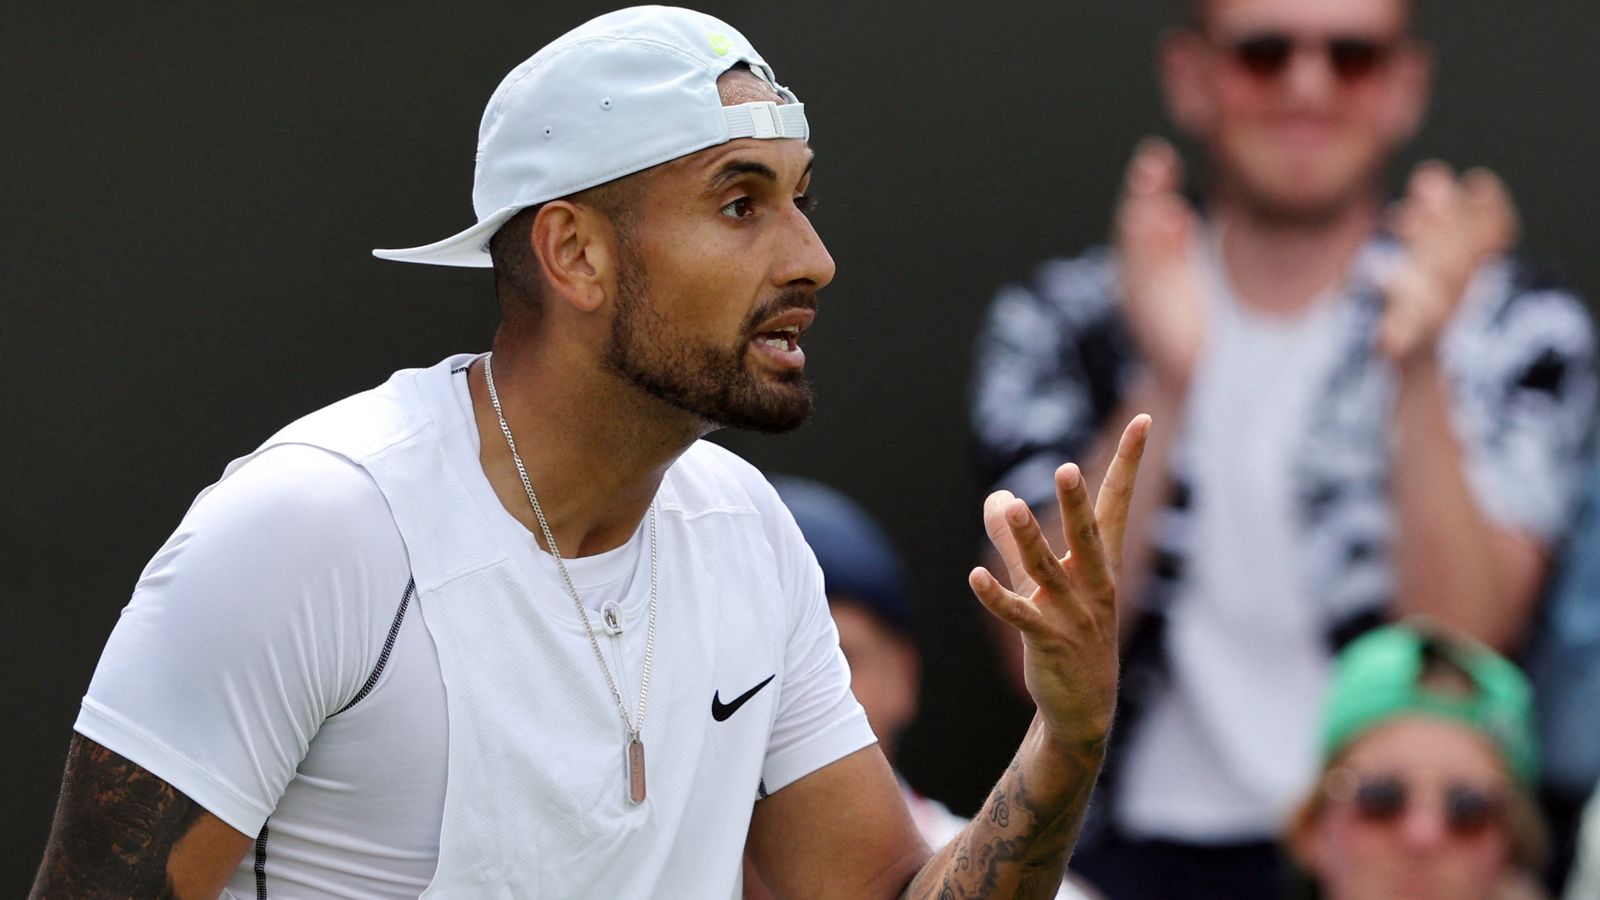 Nick Kyrgios admits spitting in direction of abusive fan during Wimbledon first-round win and questions ‘old man’ line judge